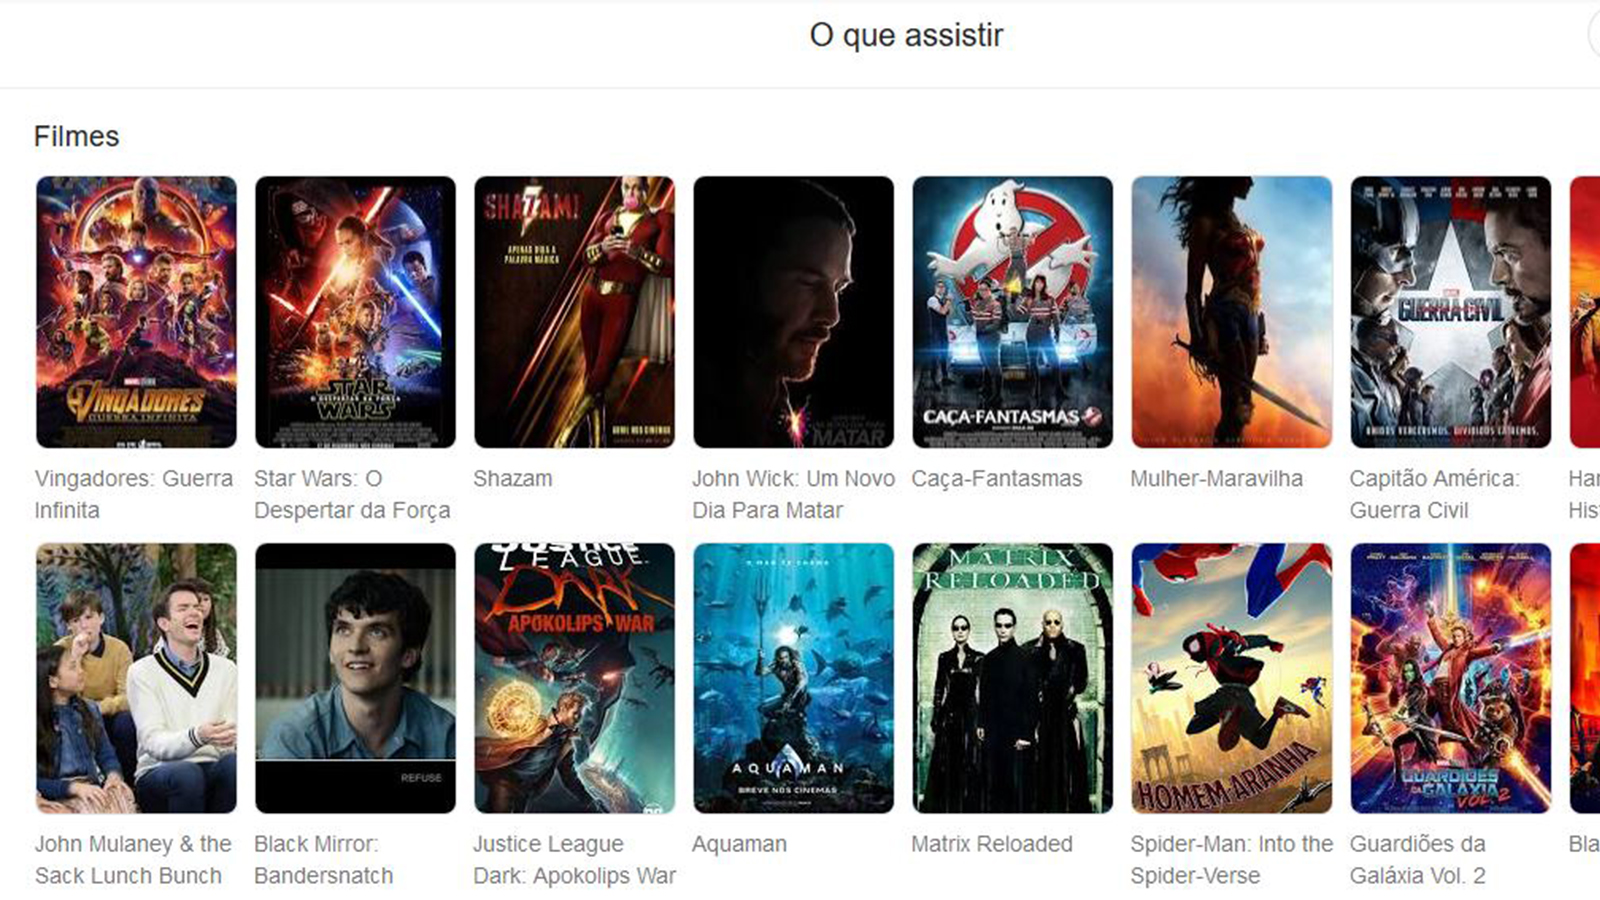 Google now gives suggestions for movies and series for you to watch